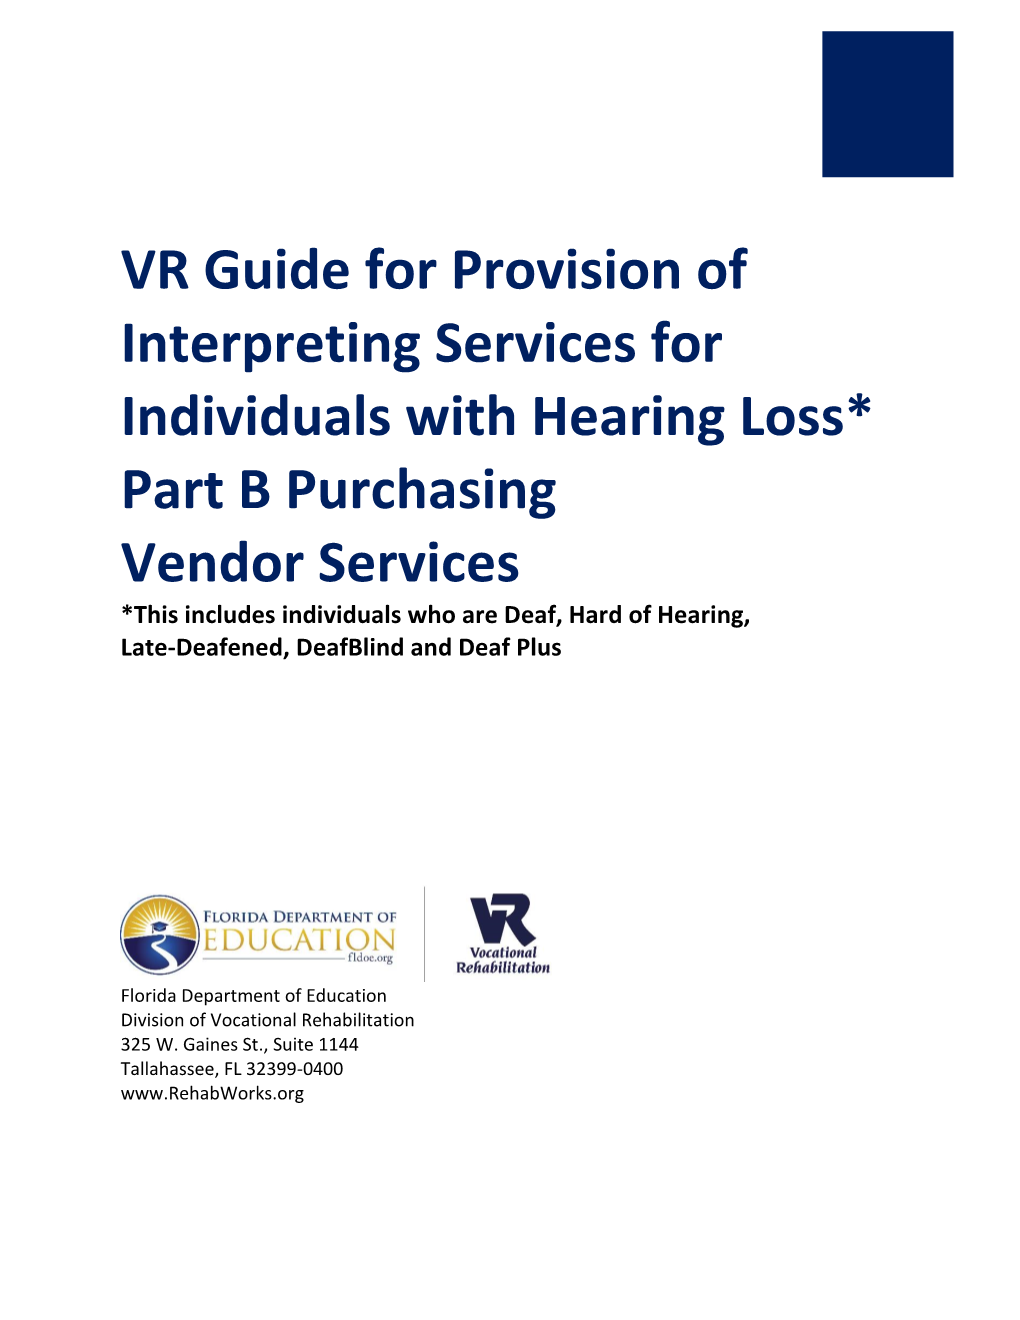 VR Guide for Provision of Interpreting Services for Individuals With